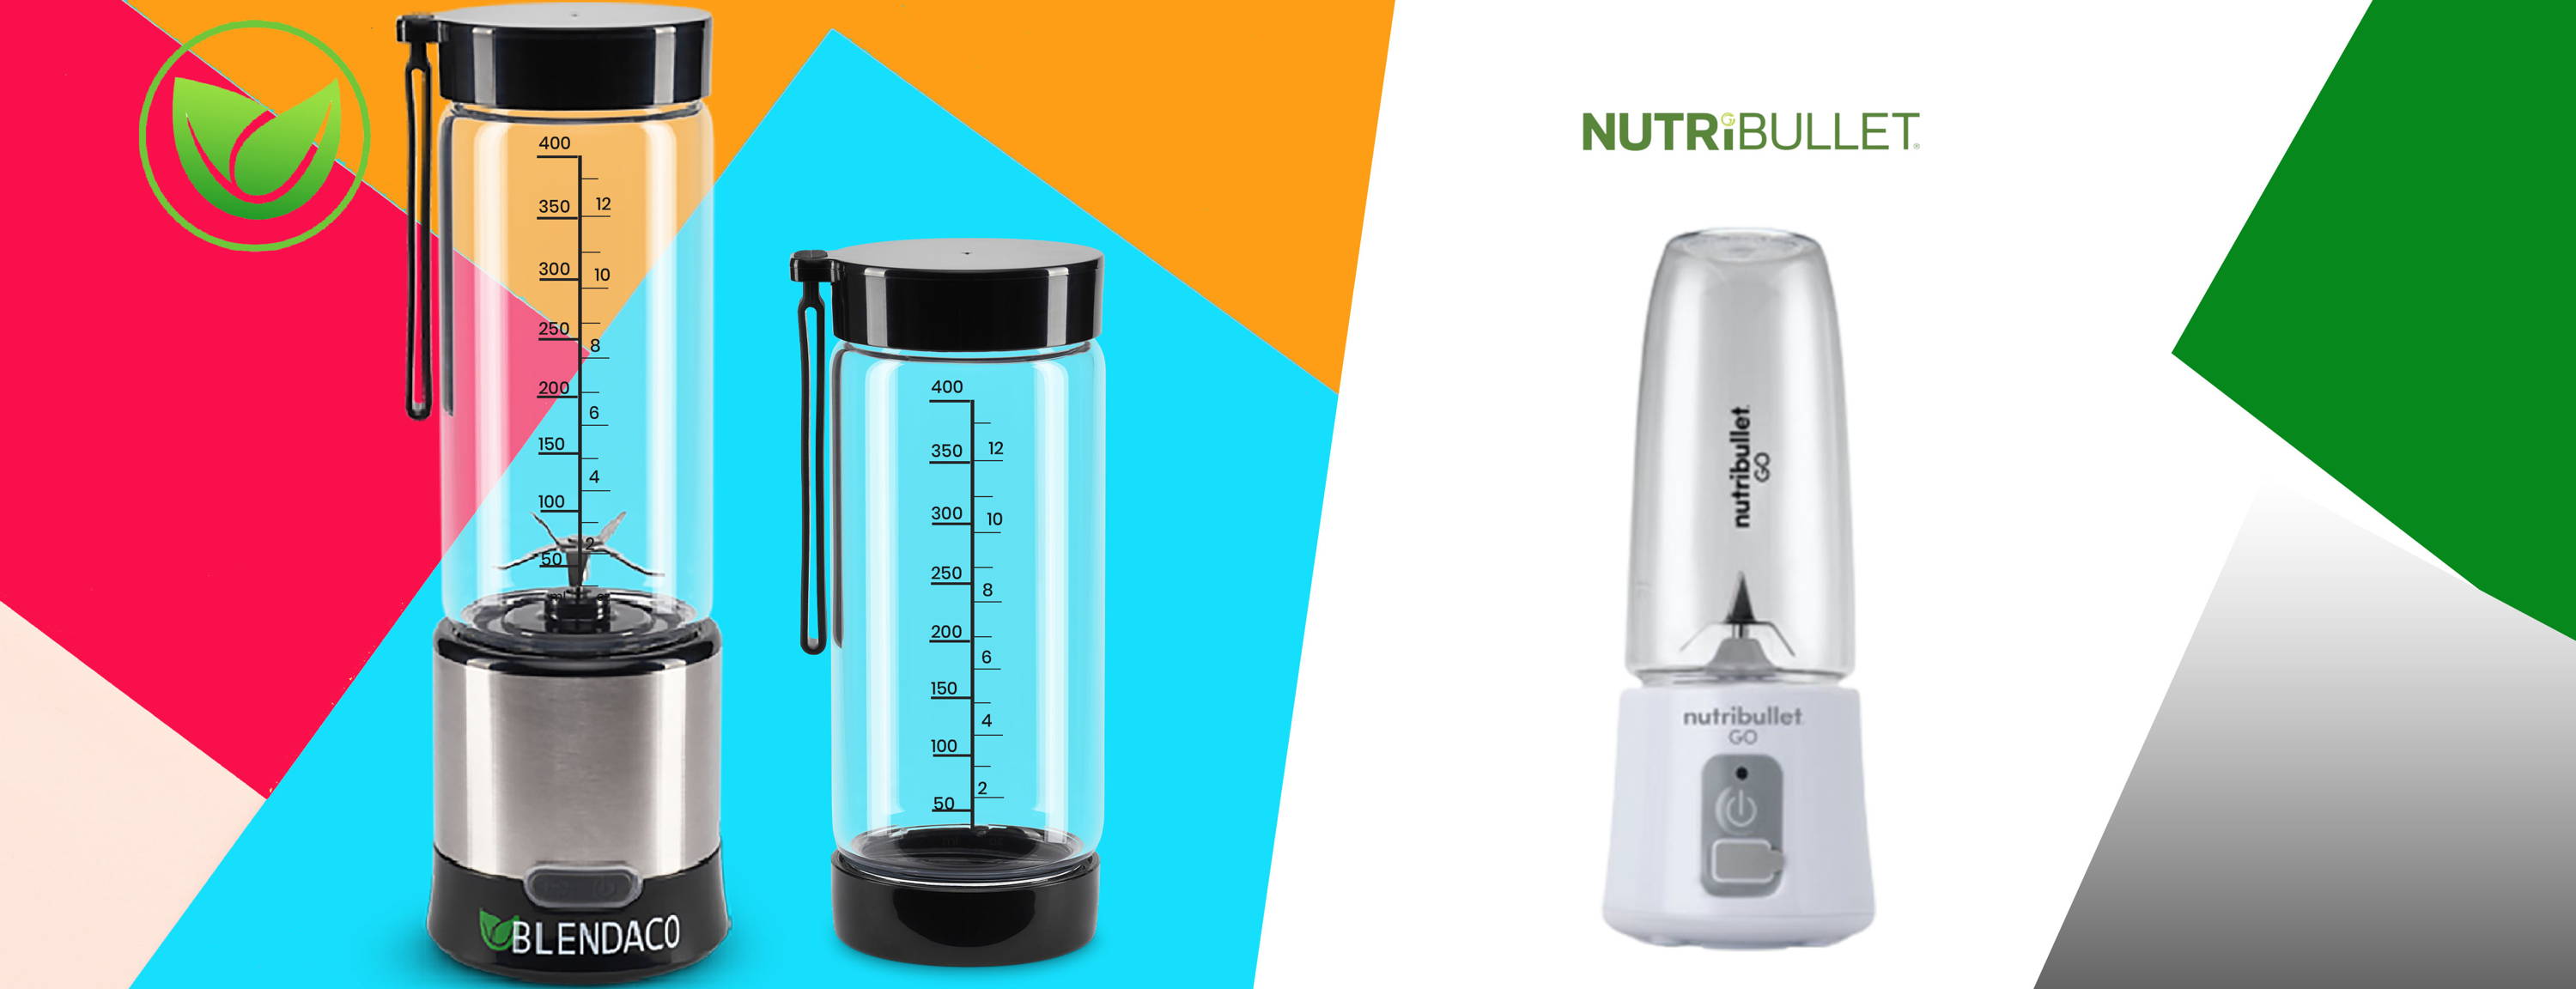 Nutribullet go review: A compact blender that doesn't pack much power